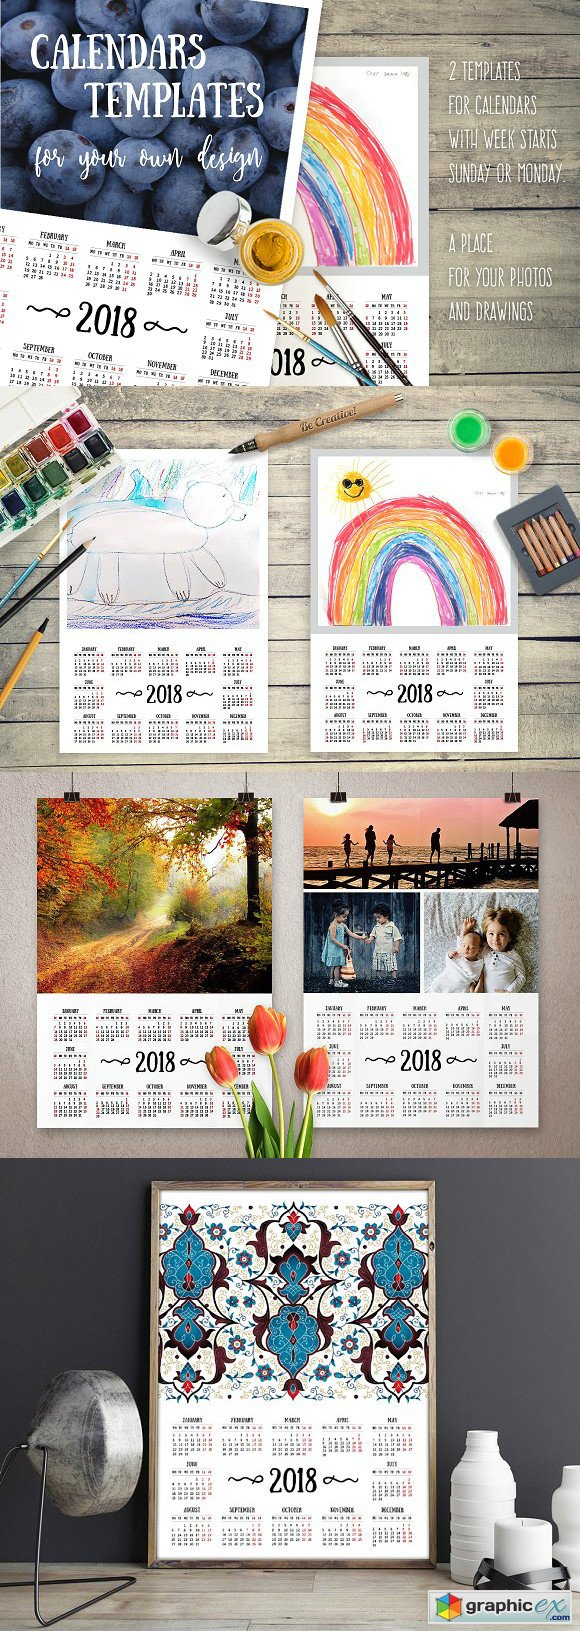 2018 Calendars For Your Own Design